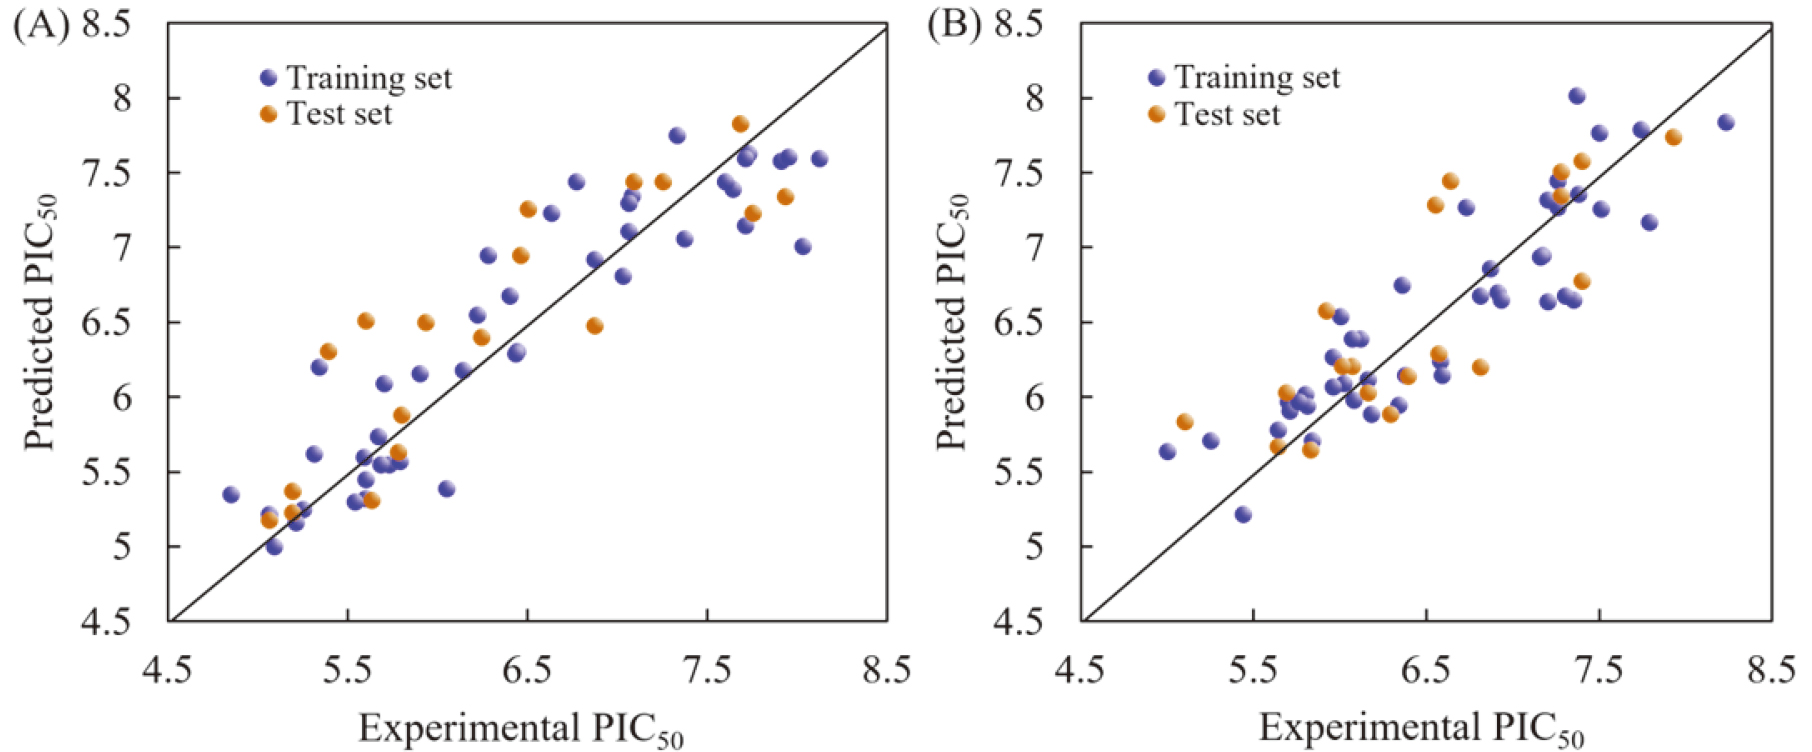 Correlation plots of the predicted and experimental PIC50 values for training and test sets of hNET (A) and hDAT (B).